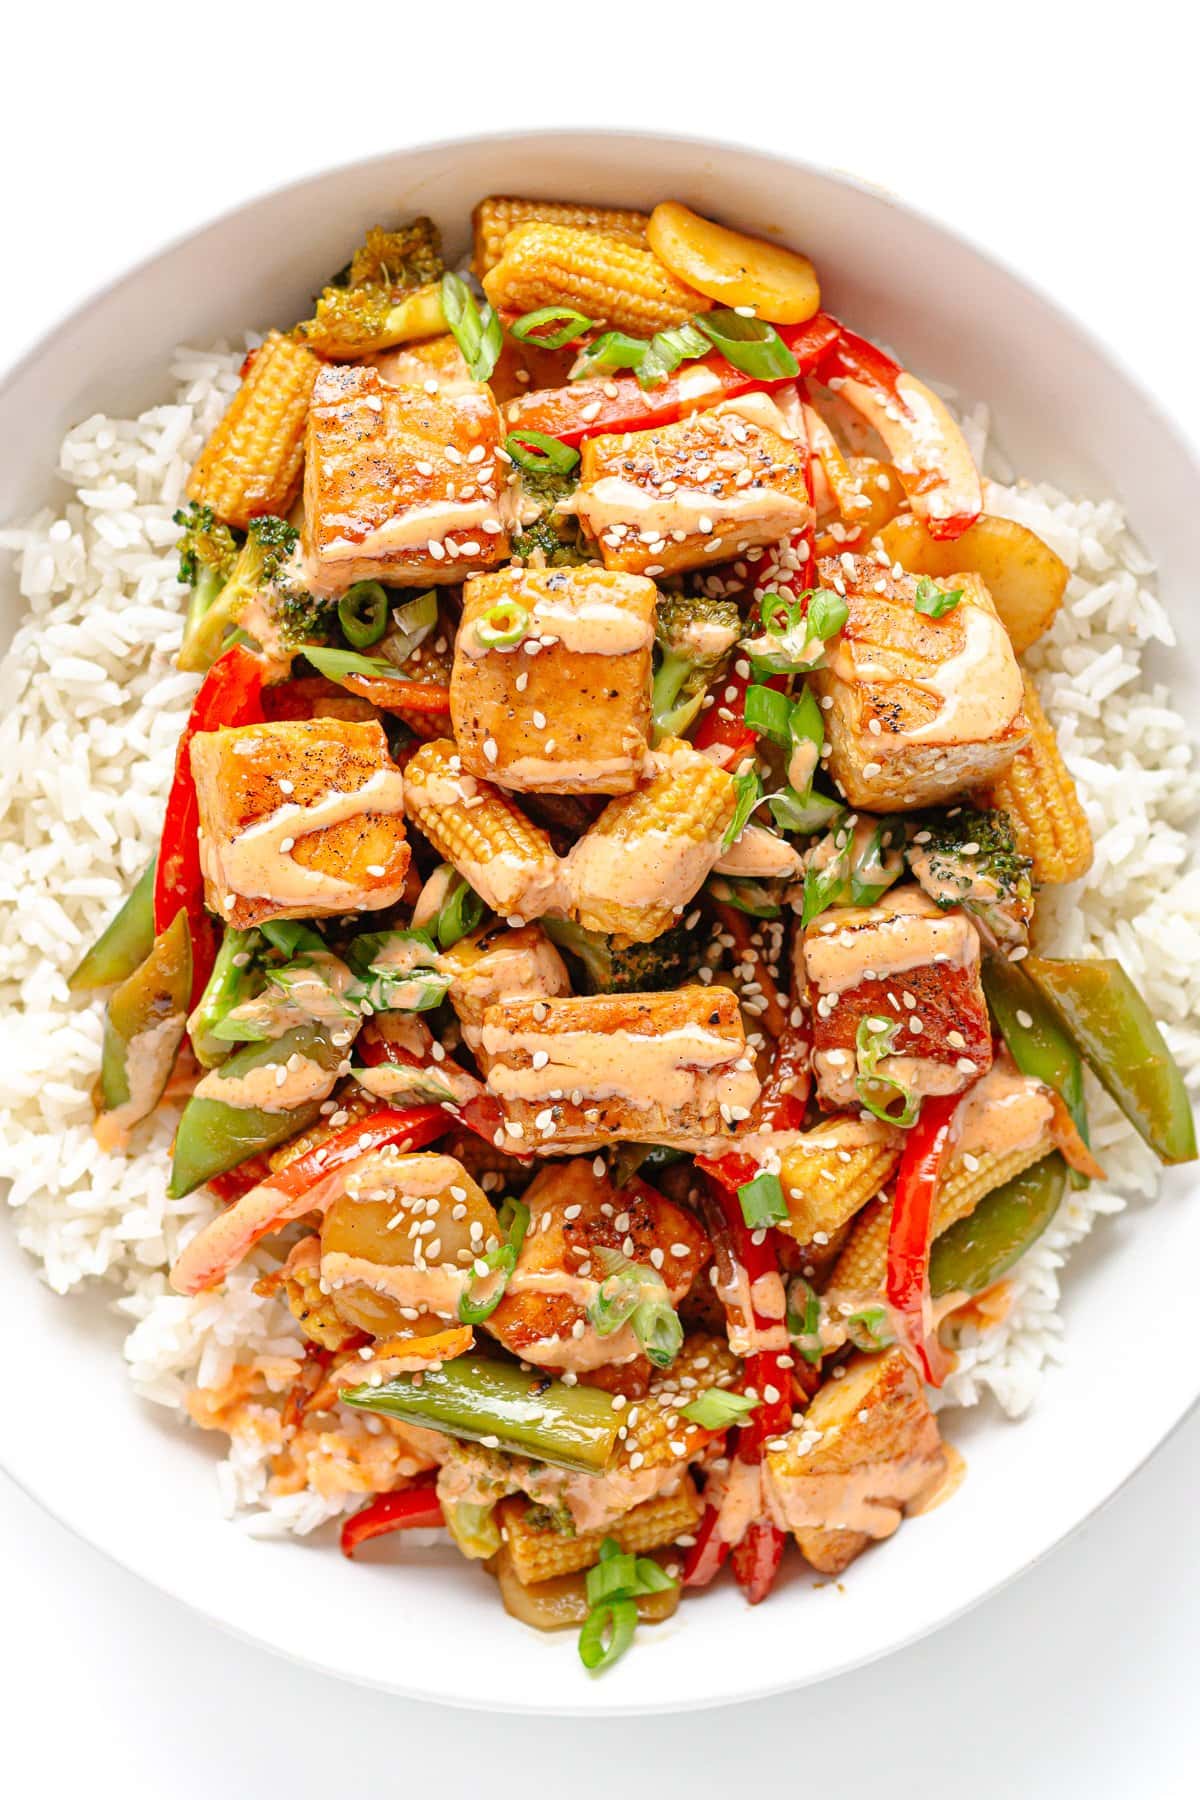 Bowl of salmon stir fry served over rice.